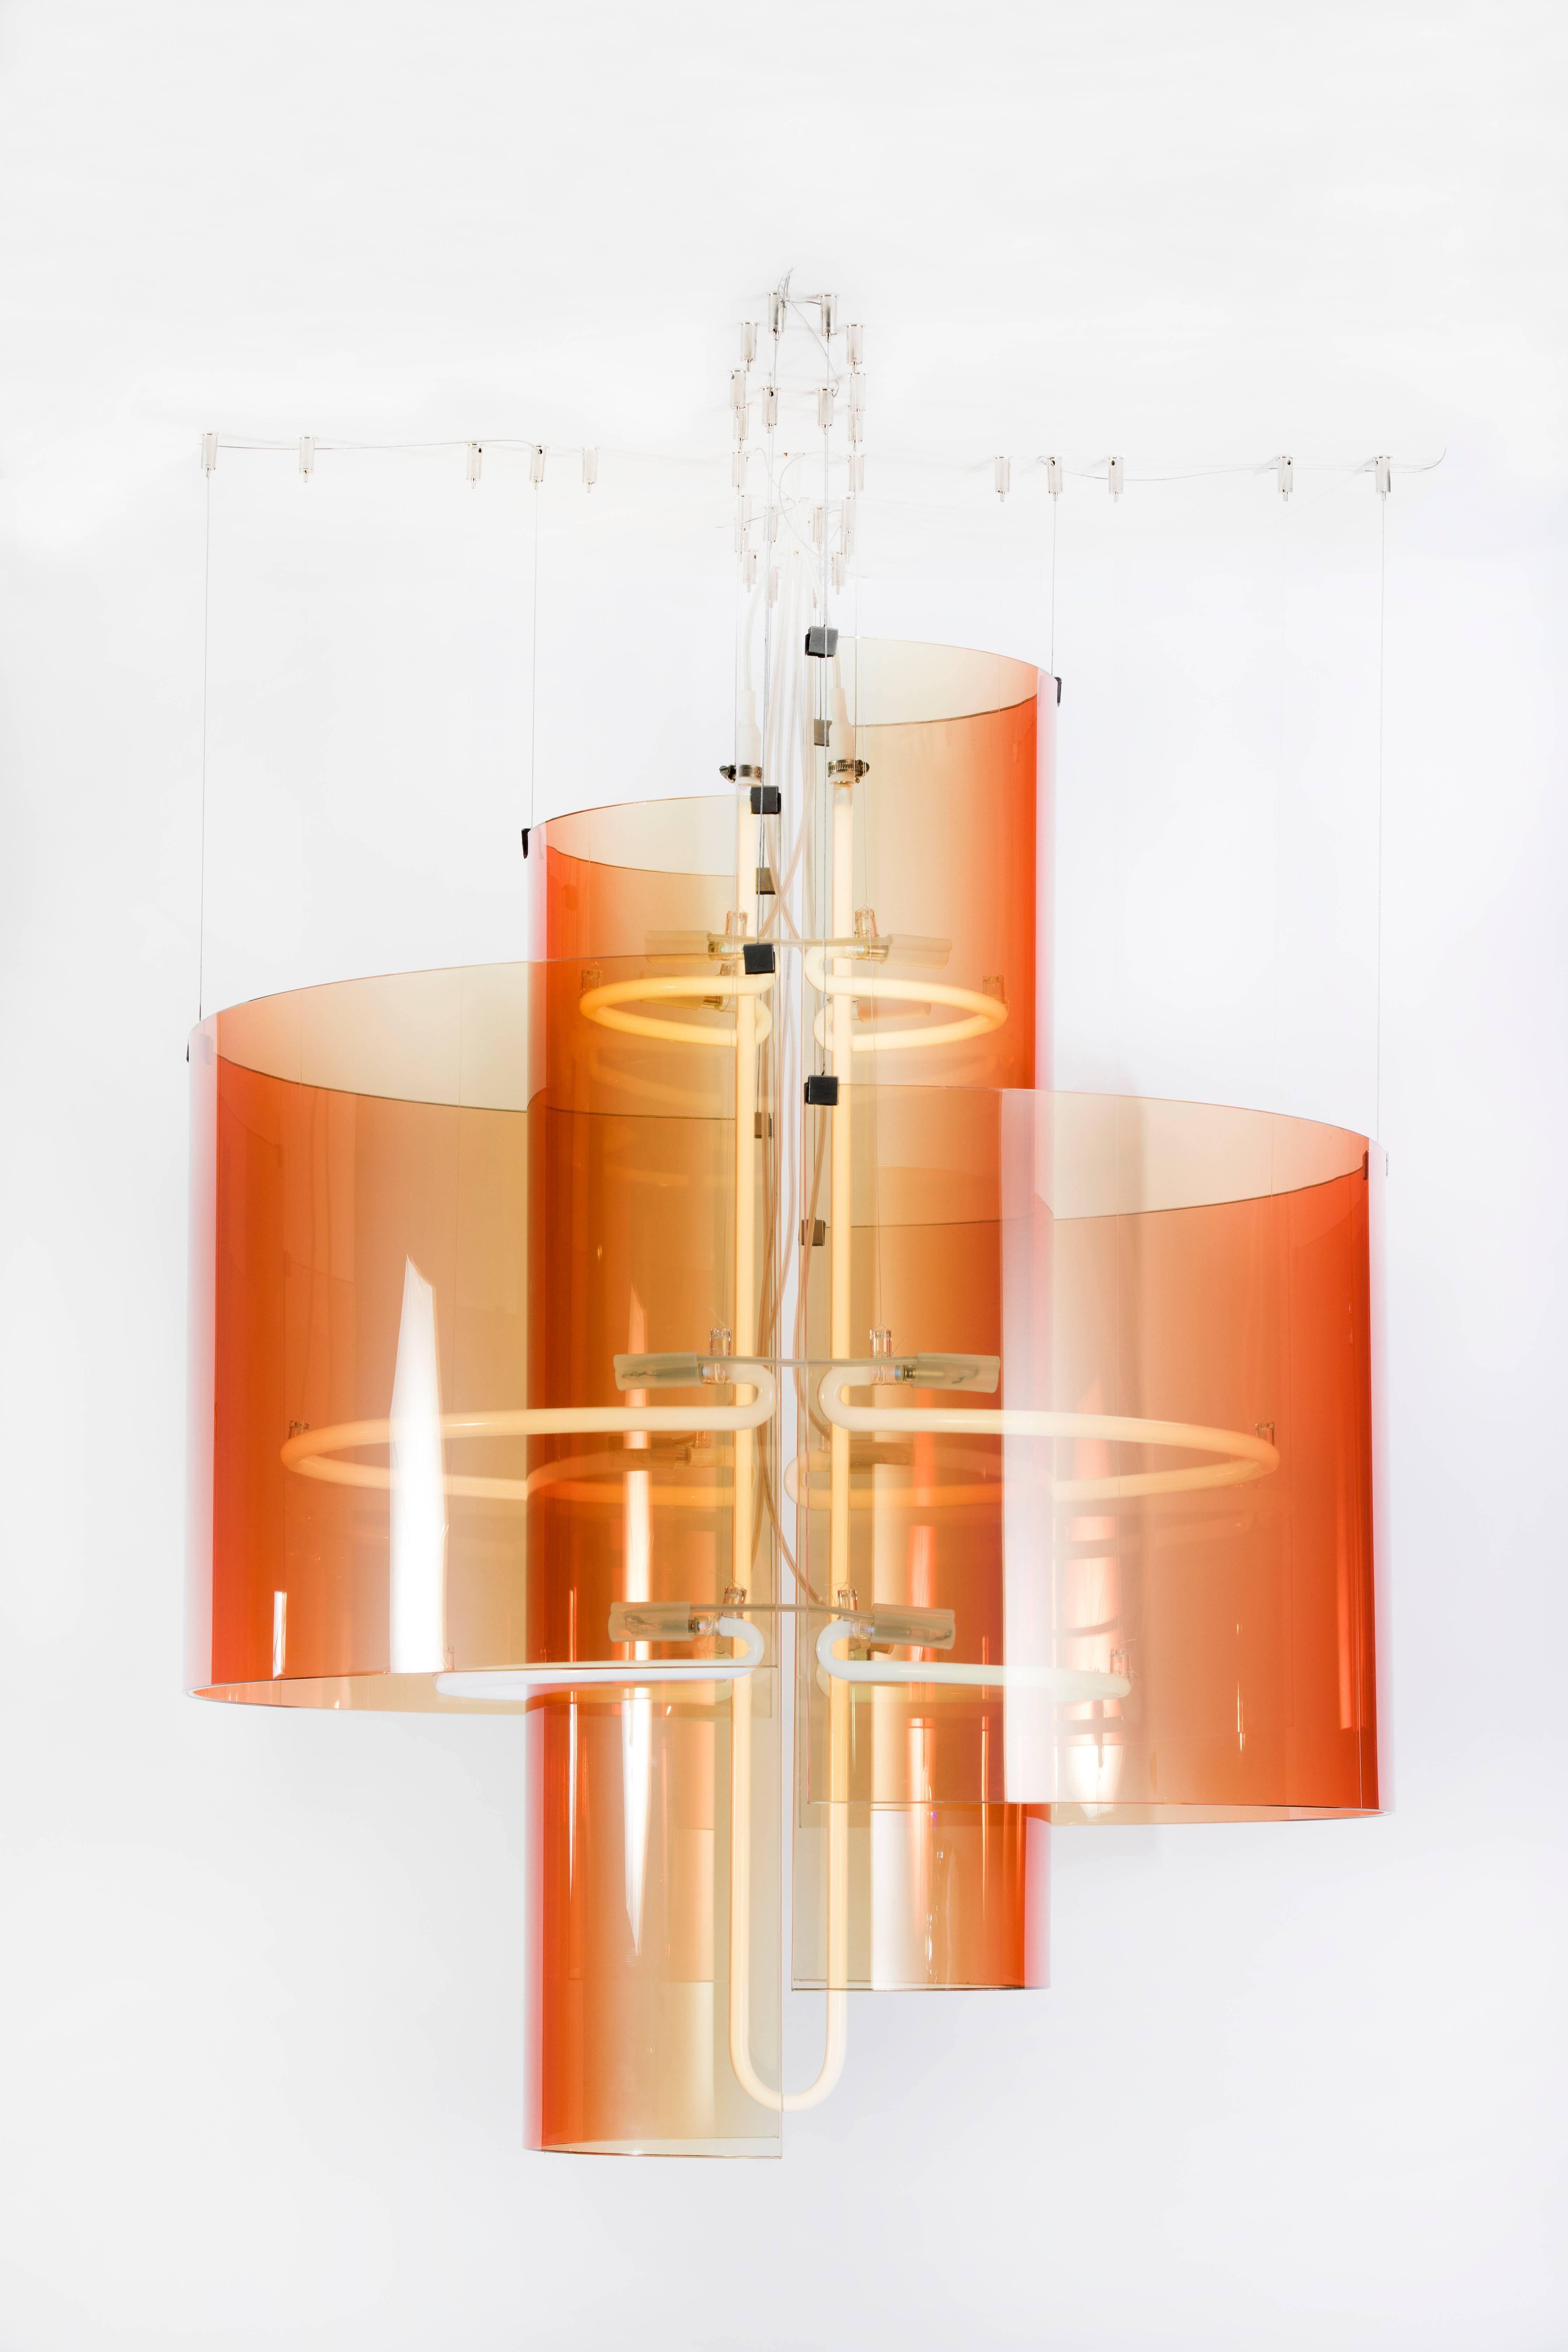 Commissioned by Etage Projects for Salon Art + Design 2017, the Chandelier by Sabine Marcelis features shells of deep amber glass circling neon rings in this airy design.